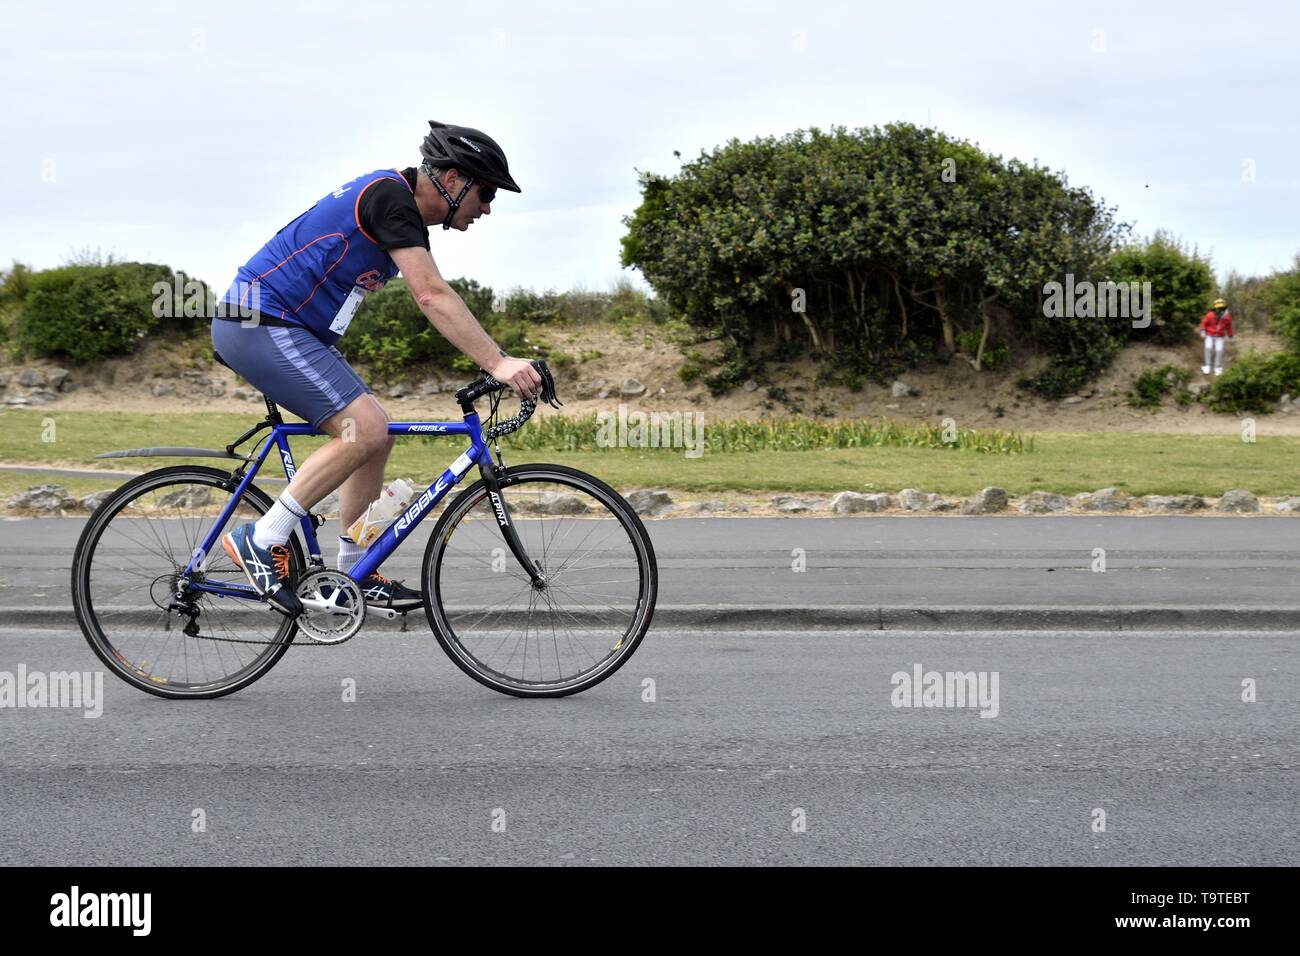 May 19th 2019 St AnnesTriathlon. Male and female triathletes competing in the cycling part of the event. Stock Photo